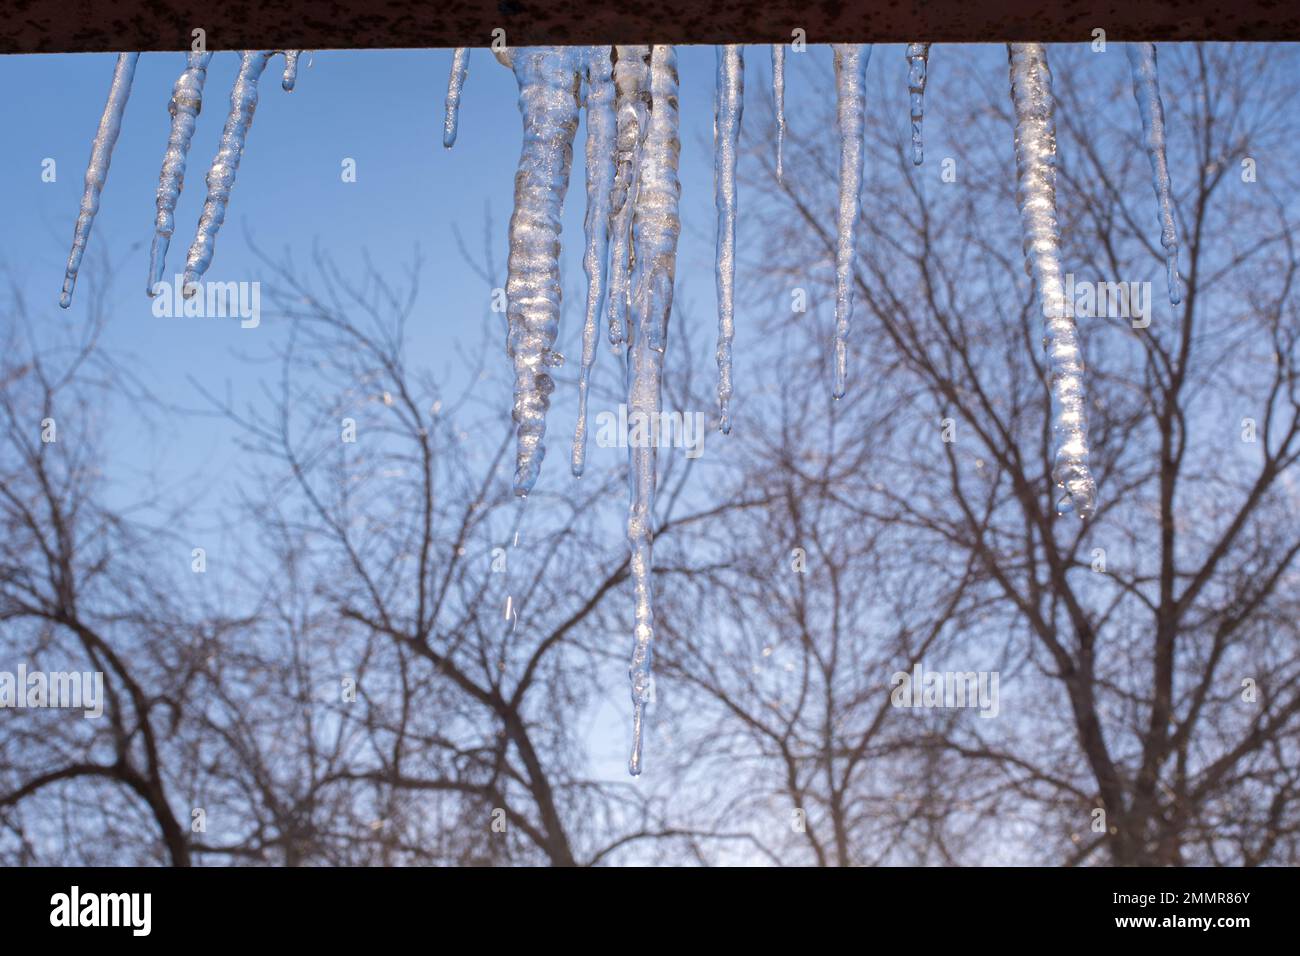 Transparent icicles hang from the roof against the blue sky and trees. Spring melting snow. Stock Photo